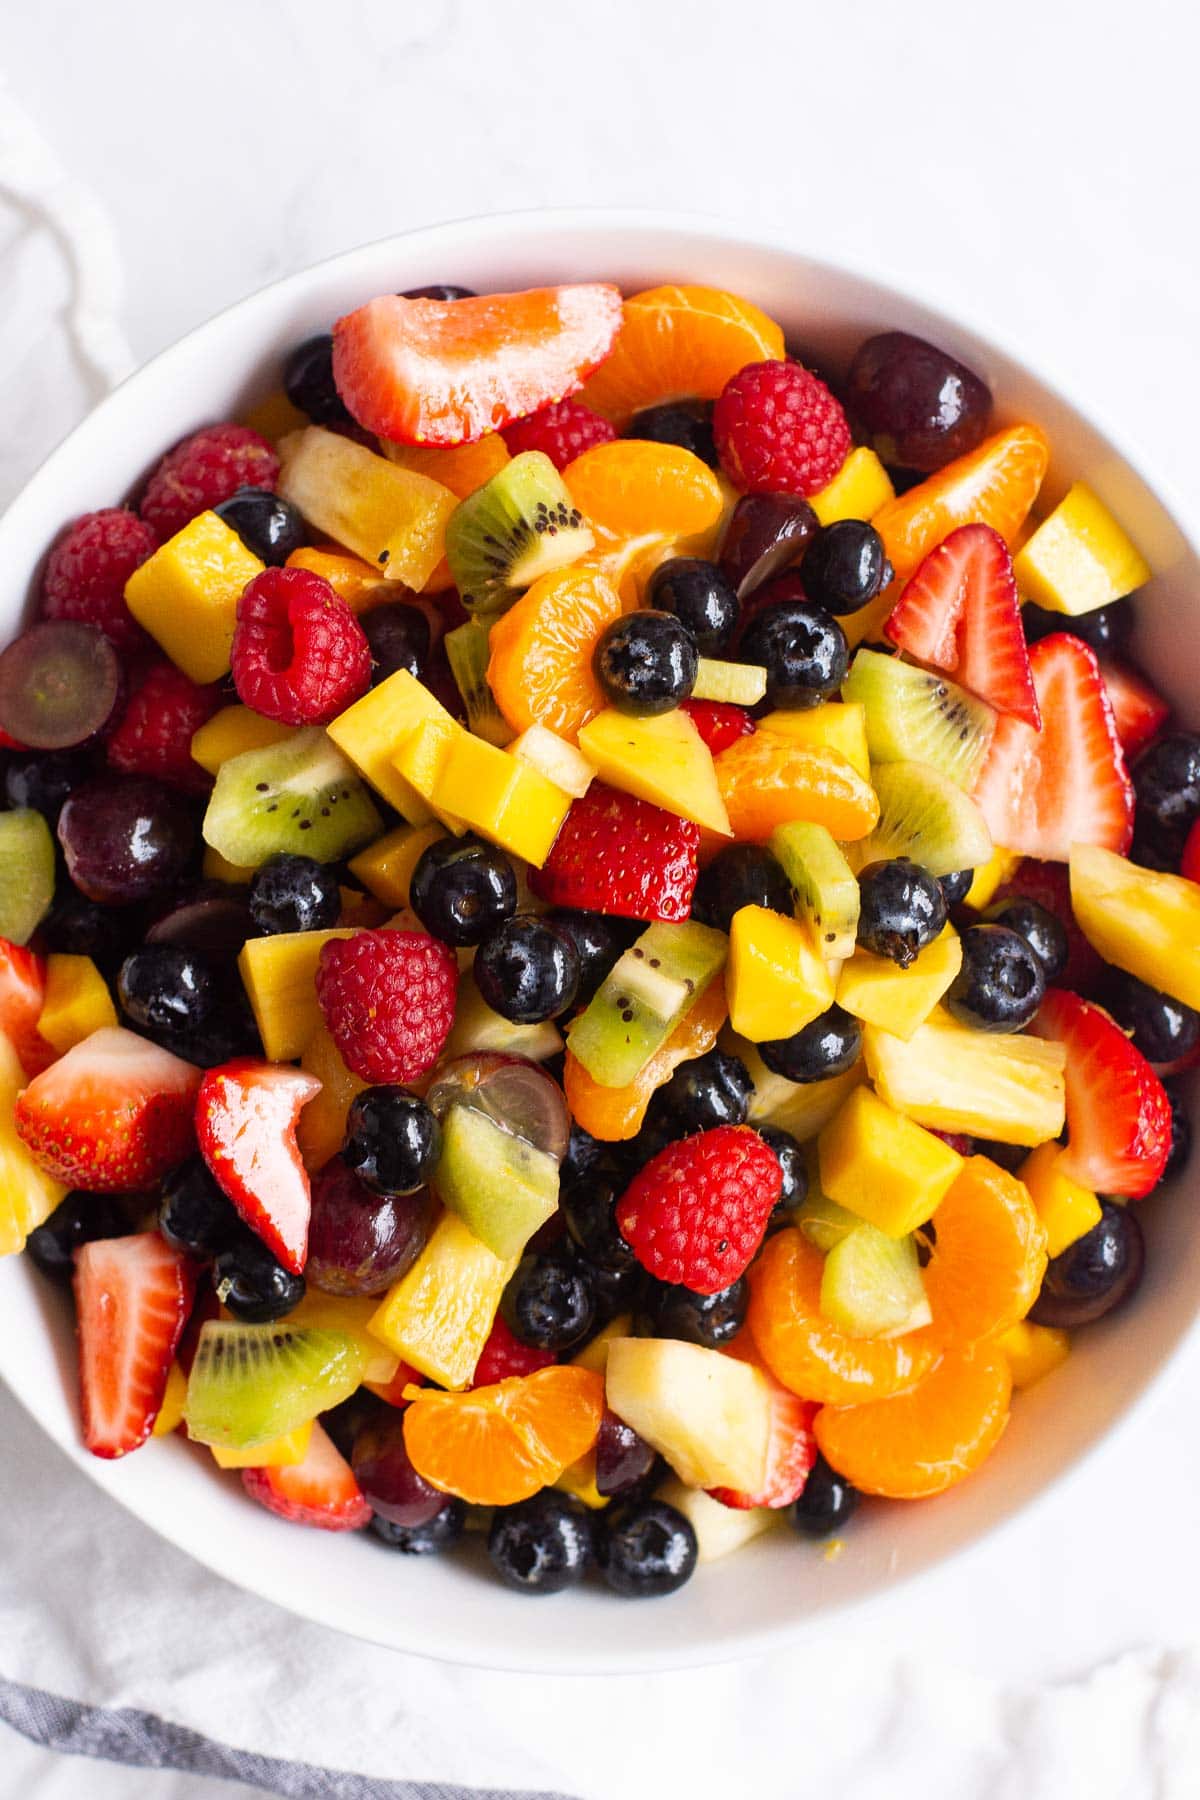 Healthy fruit salad with mandarins, kiwi, grapes and berries in a bowl.